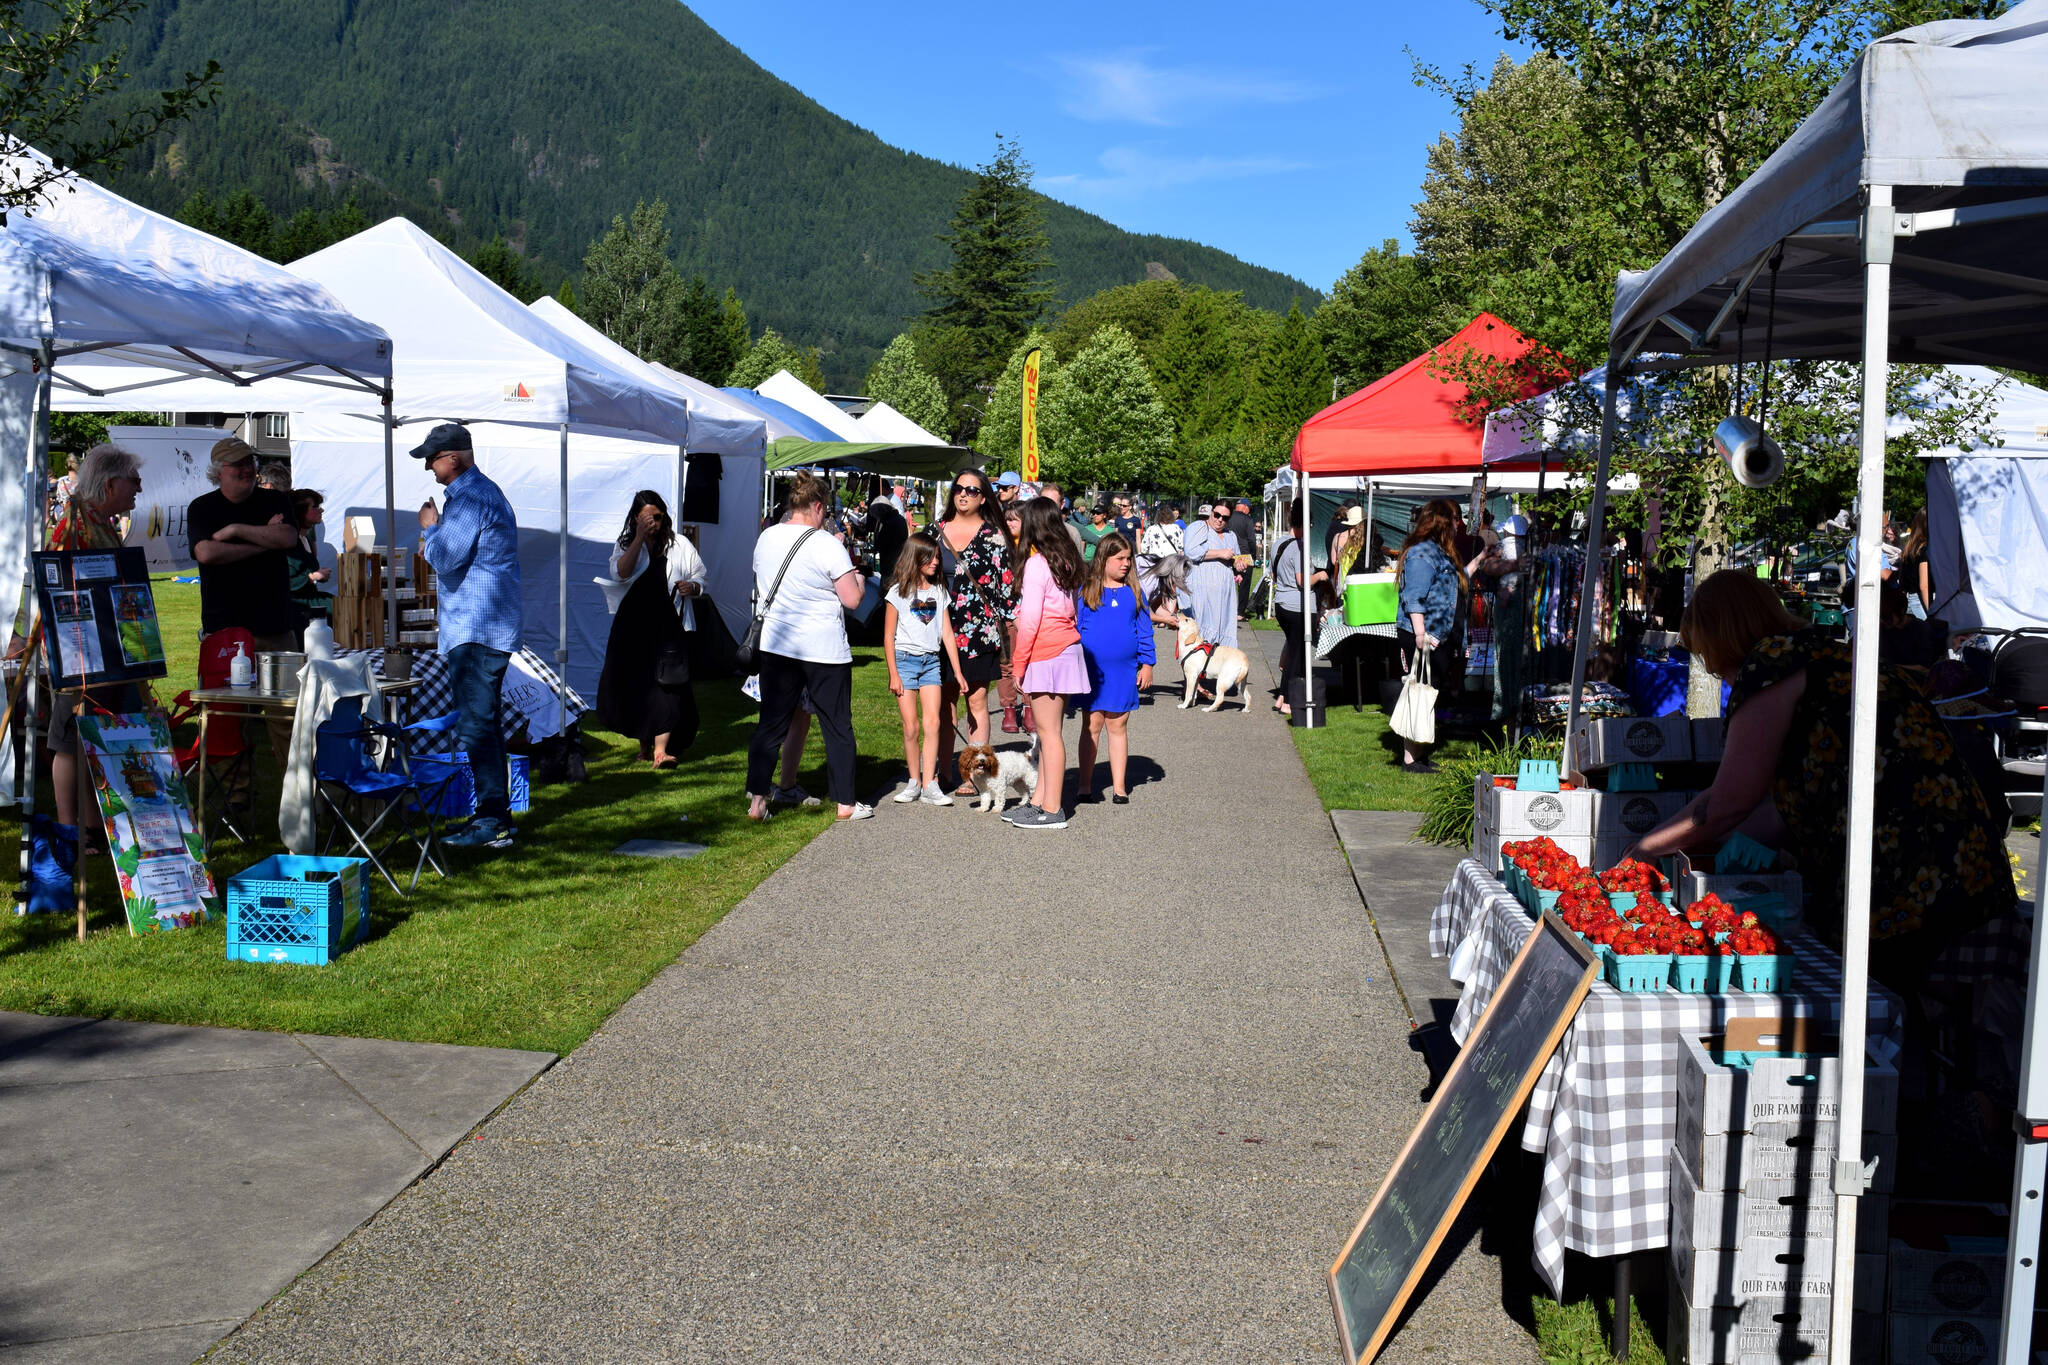 The North Bend Farmer's Market on June 23.